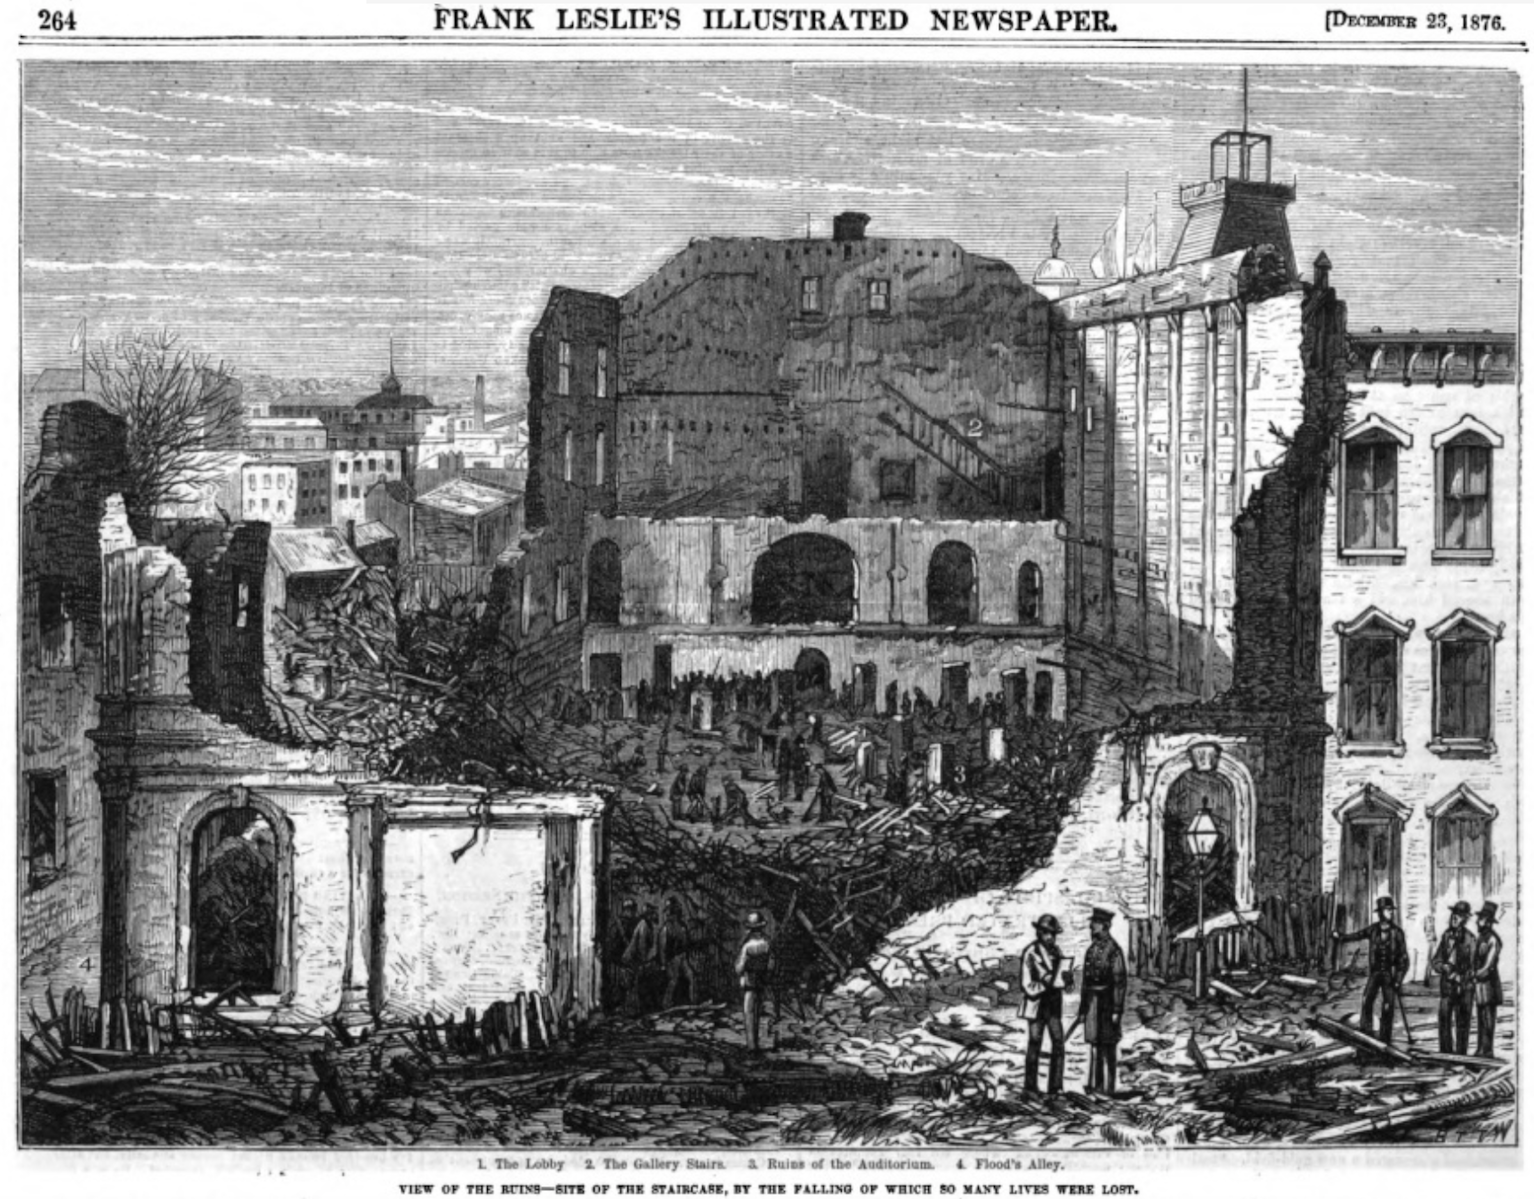 The charred remains of the Brooklyn Theater, courtesy Frank Leslie's Illustrated Newspaper: